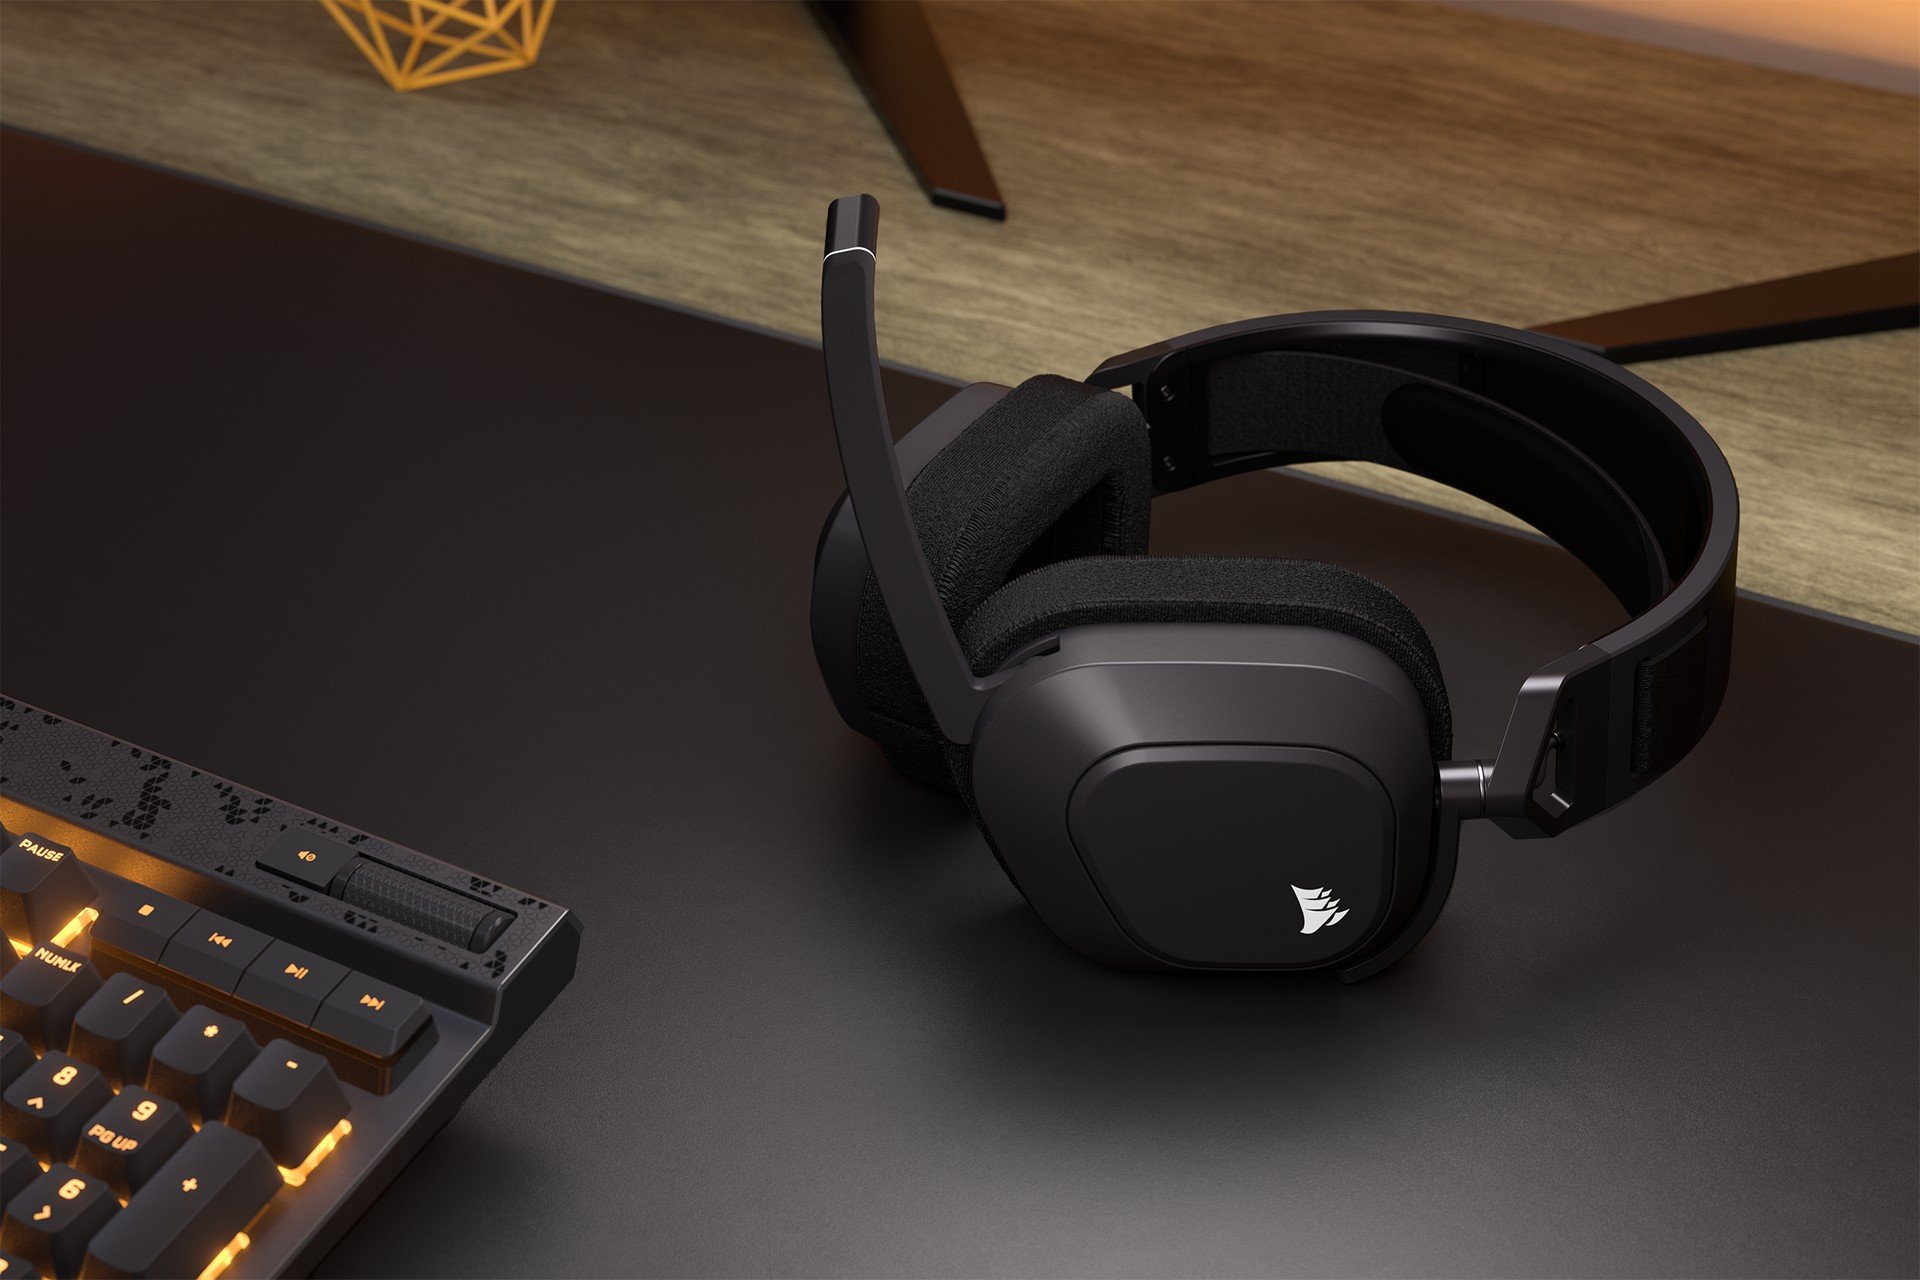 More information about "Corsair HS80 Max Wireless Gaming Headset Review"